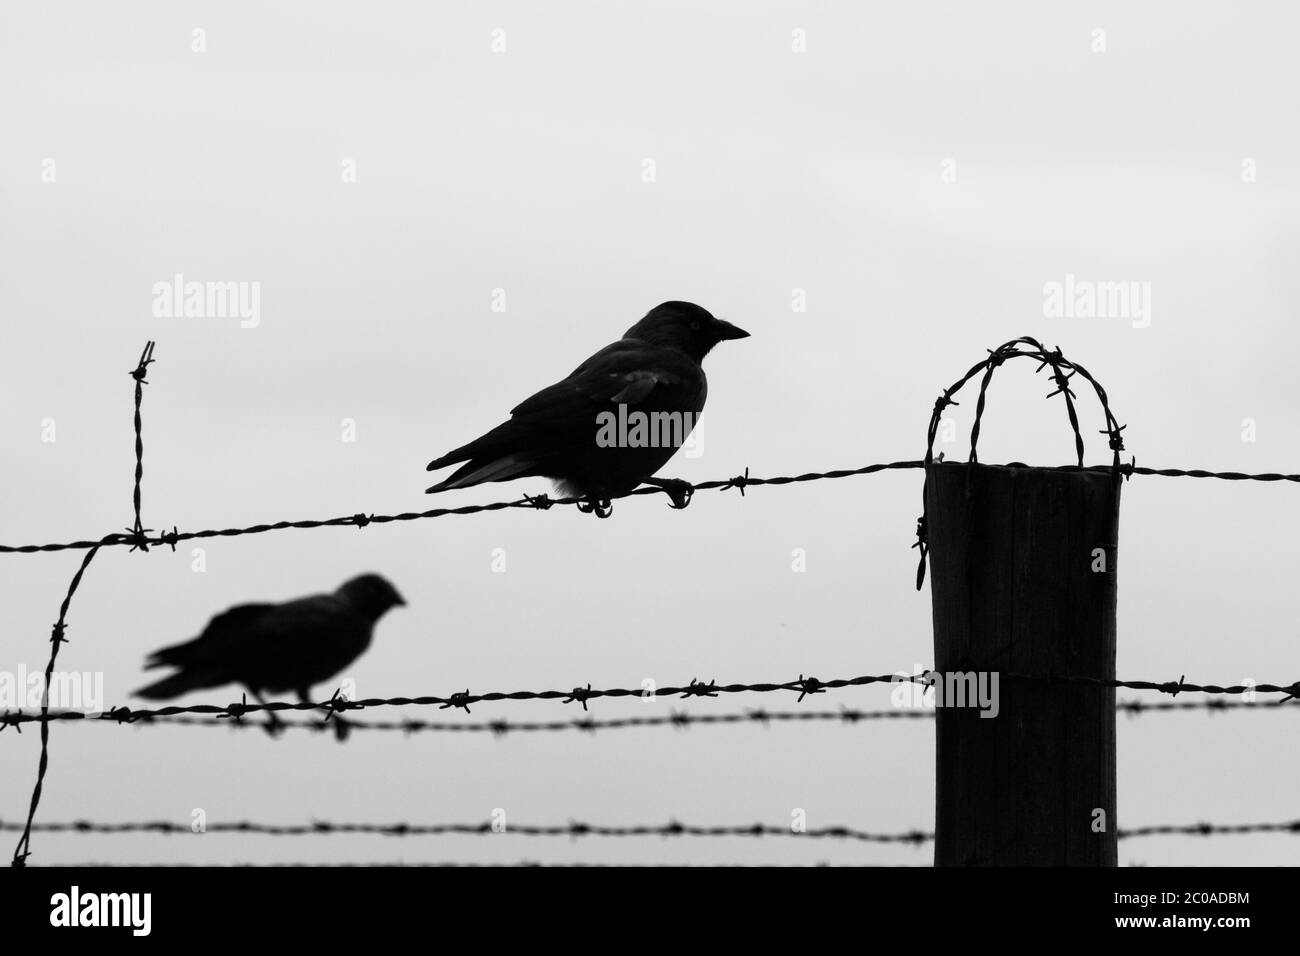 Silhouette of two crows sitting on the barb wire fence. Black and white image. Stock Photo